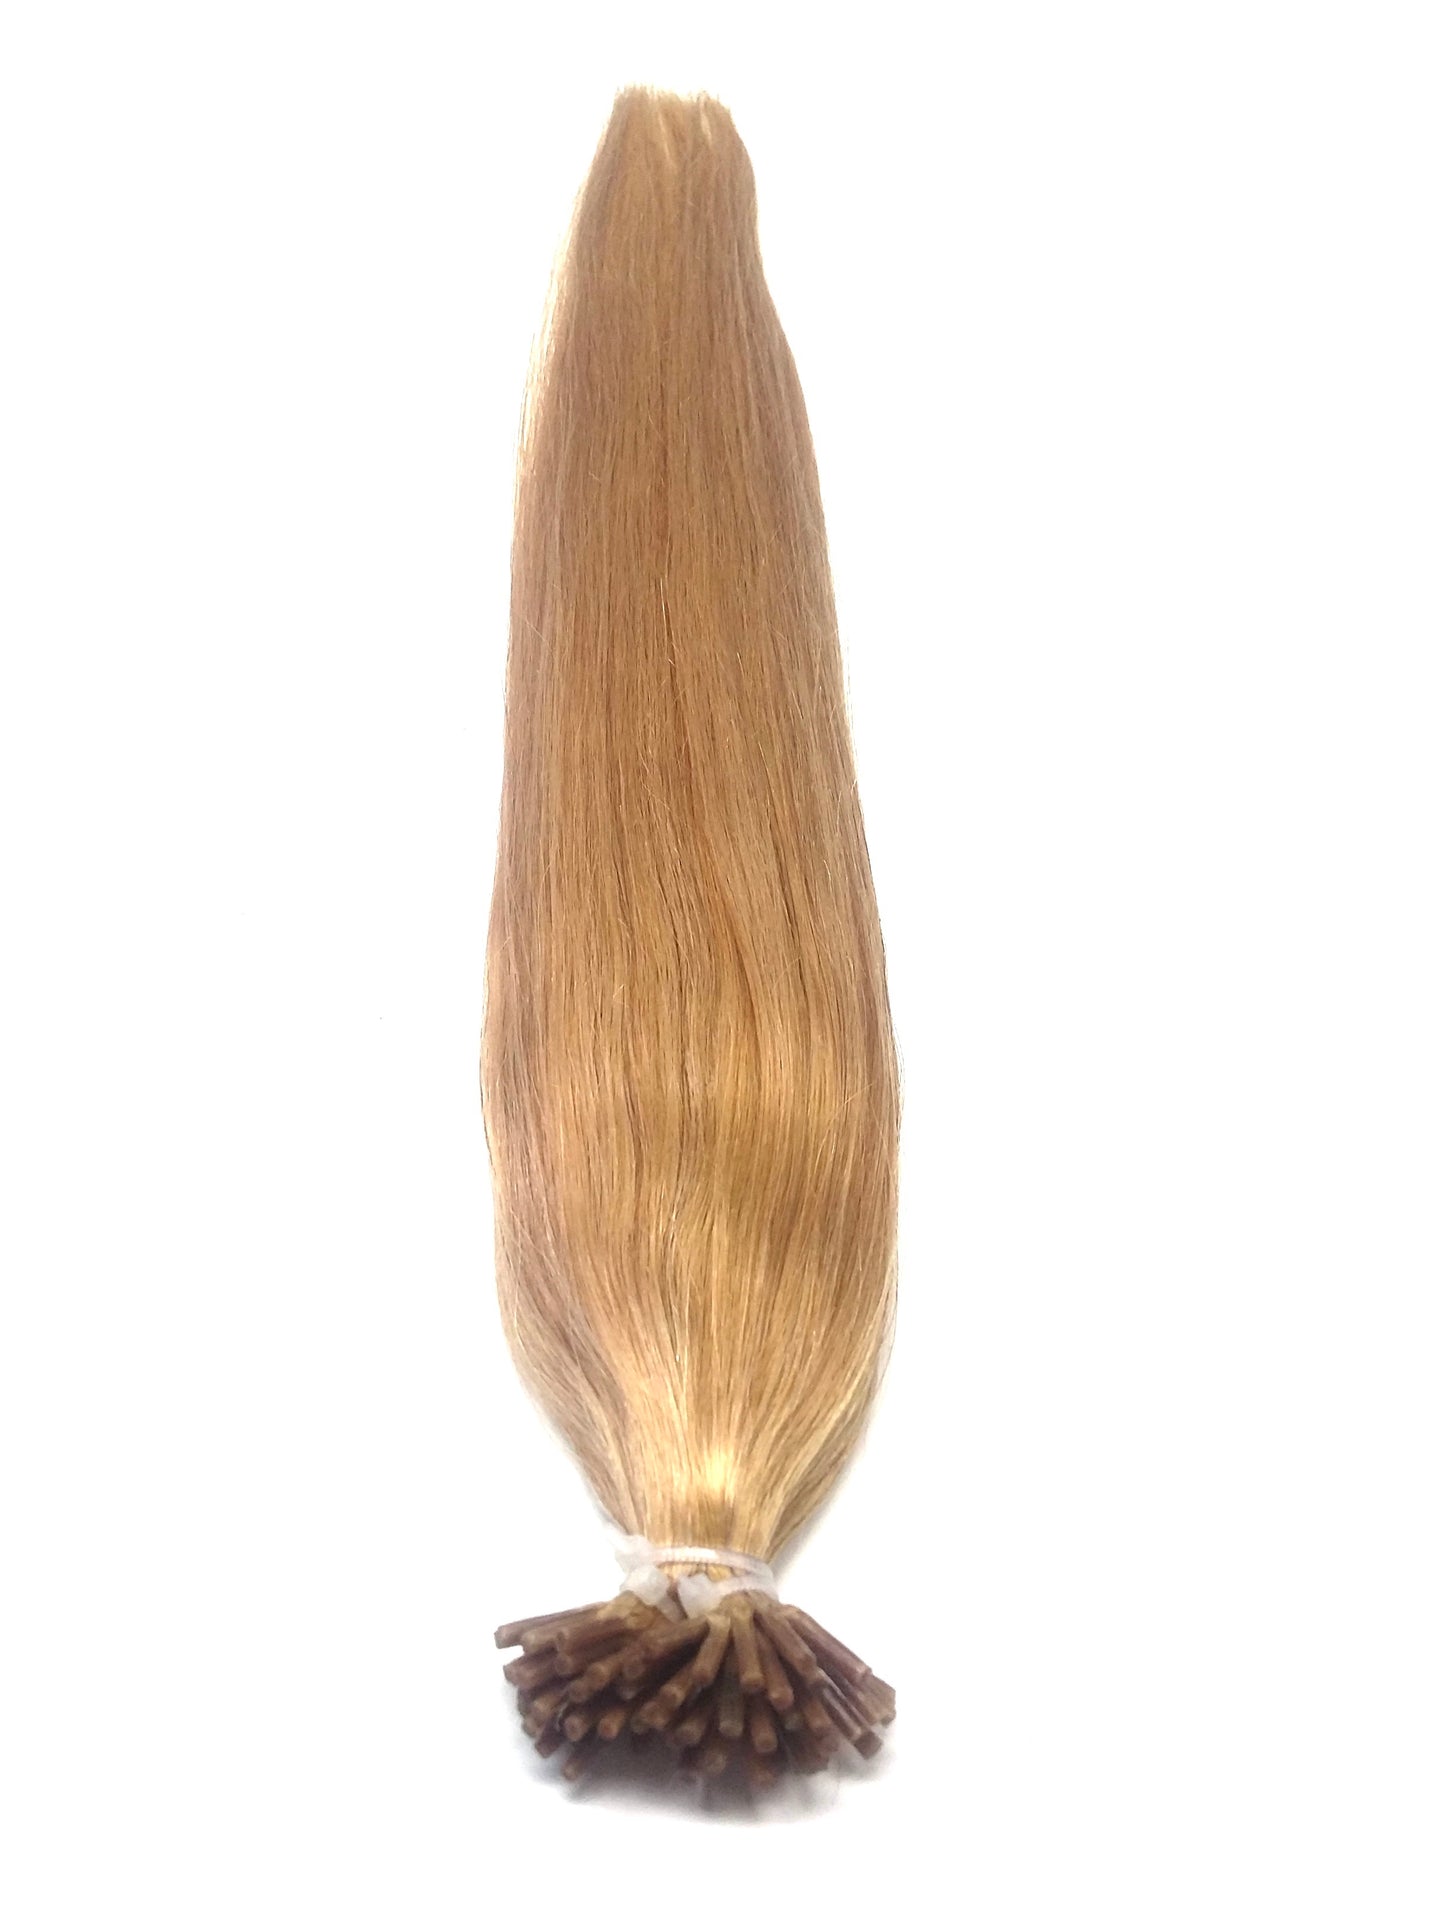 Russian Remy Human Hair, 1g i-Tips, Straight, 20'', Colour 18, 50g, Quick Shipping!